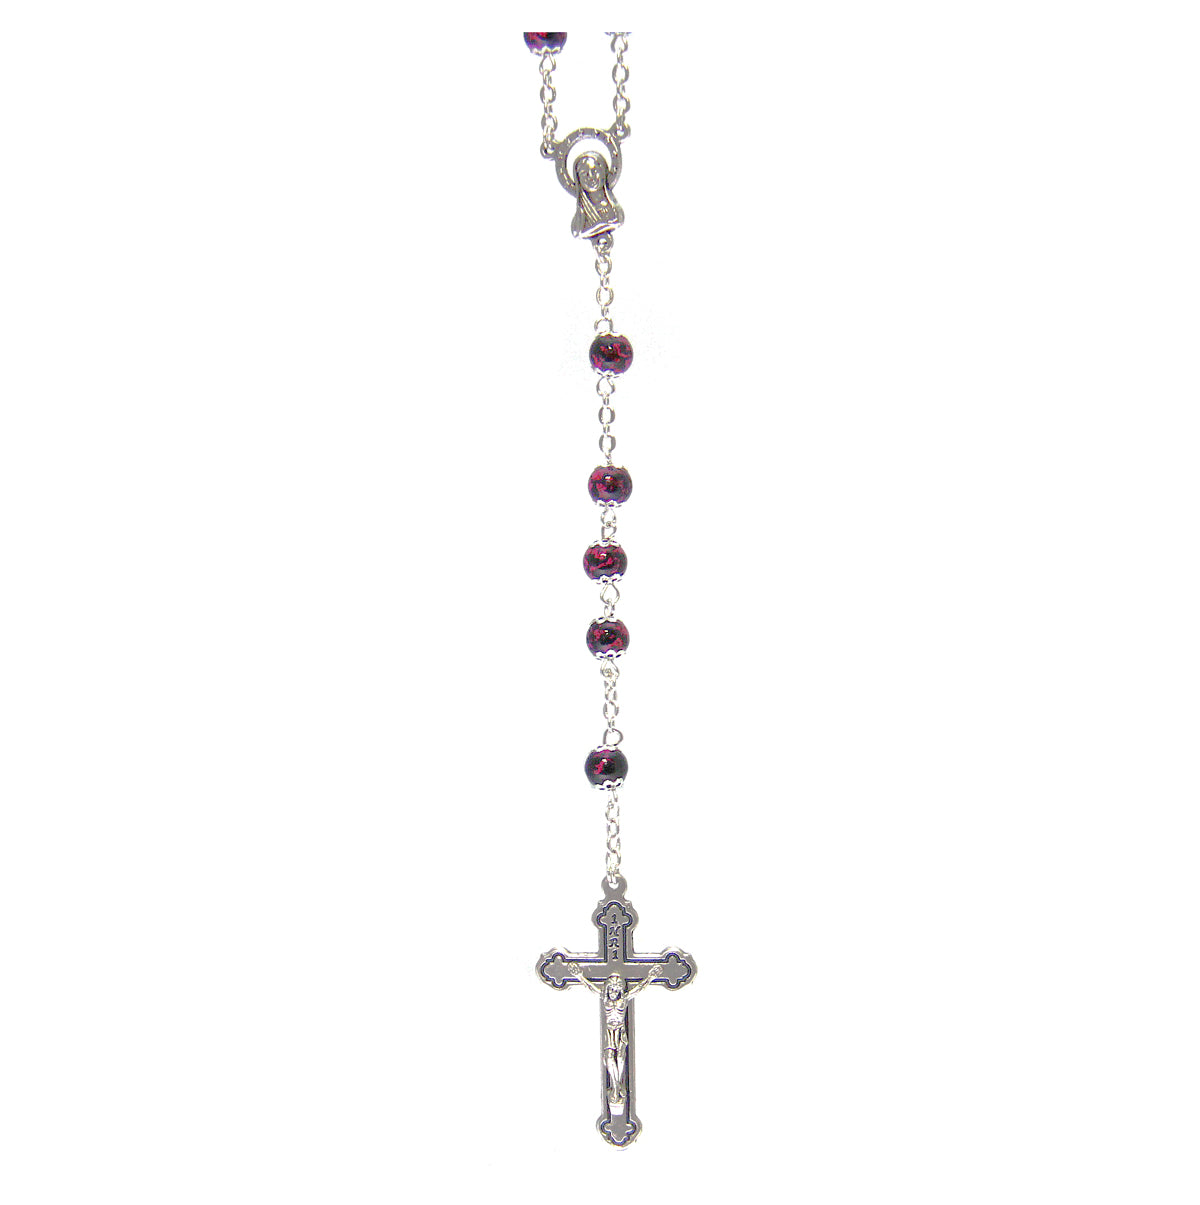 Speckled Bead Rosary